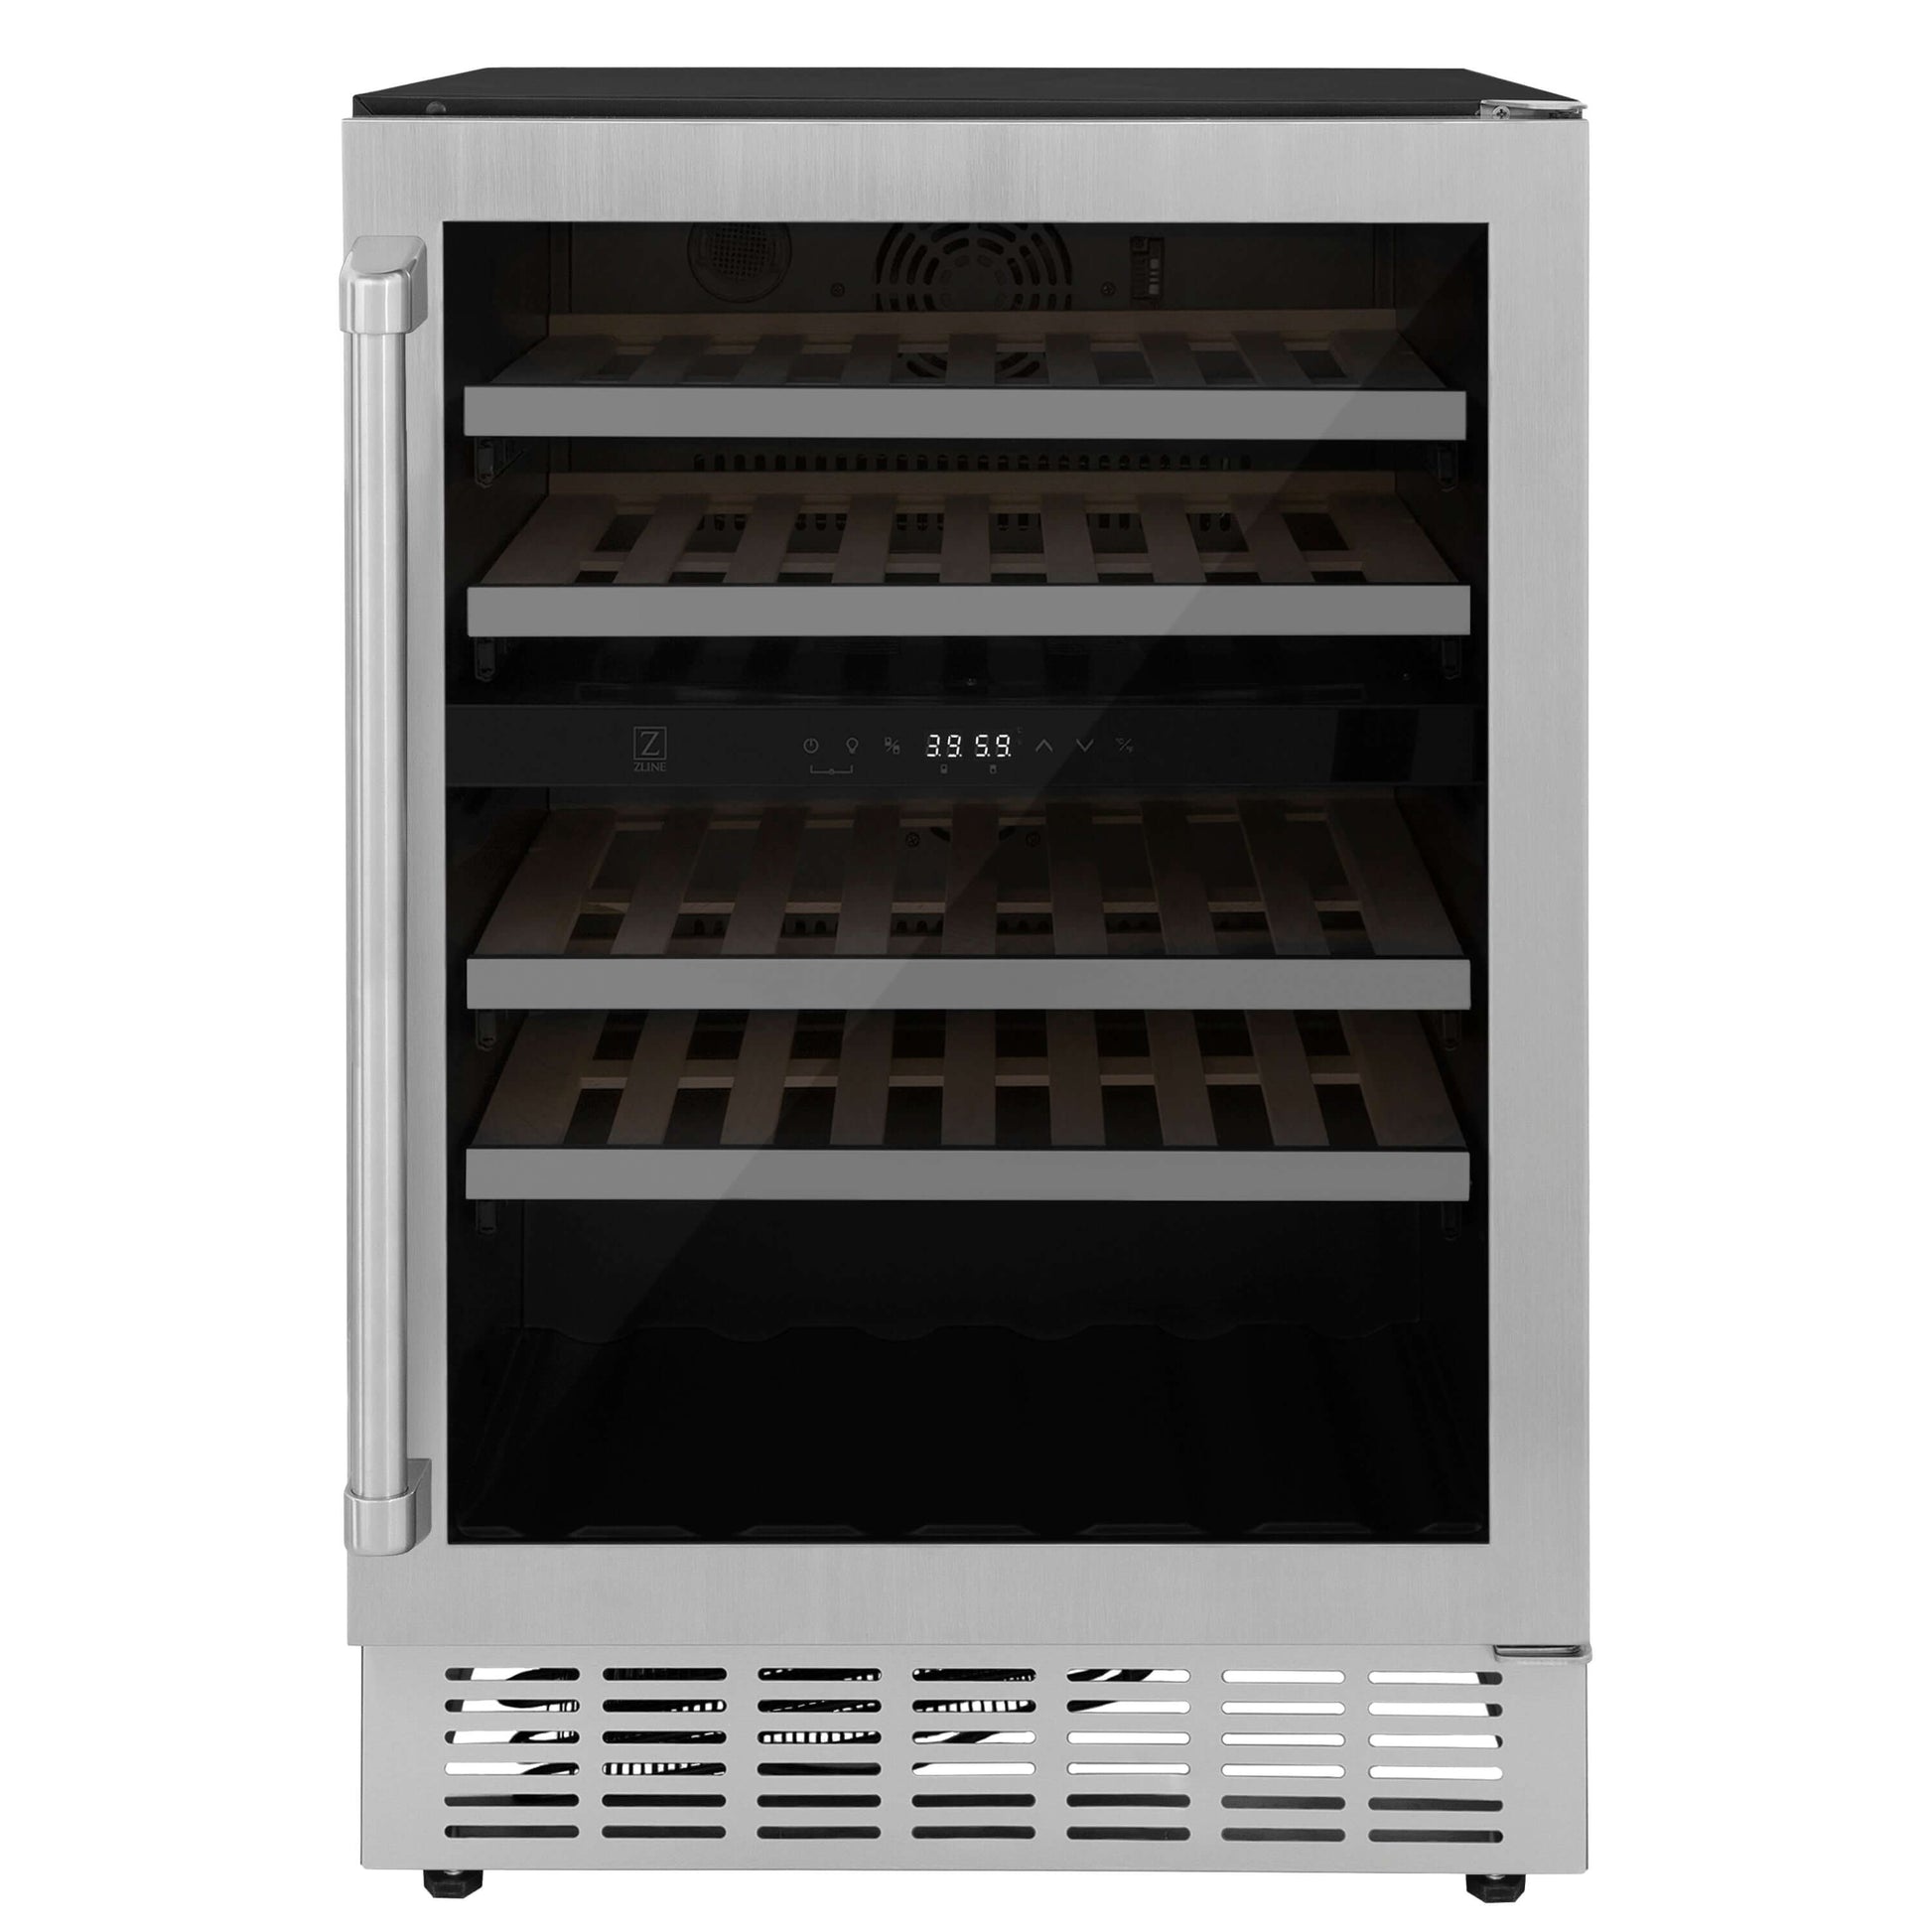 ZLINE 24 In. Monument Dual Zone 44-Bottle Wine Cooler in Stainless Steel with Wood Shelf (RWV-UD-24) front.